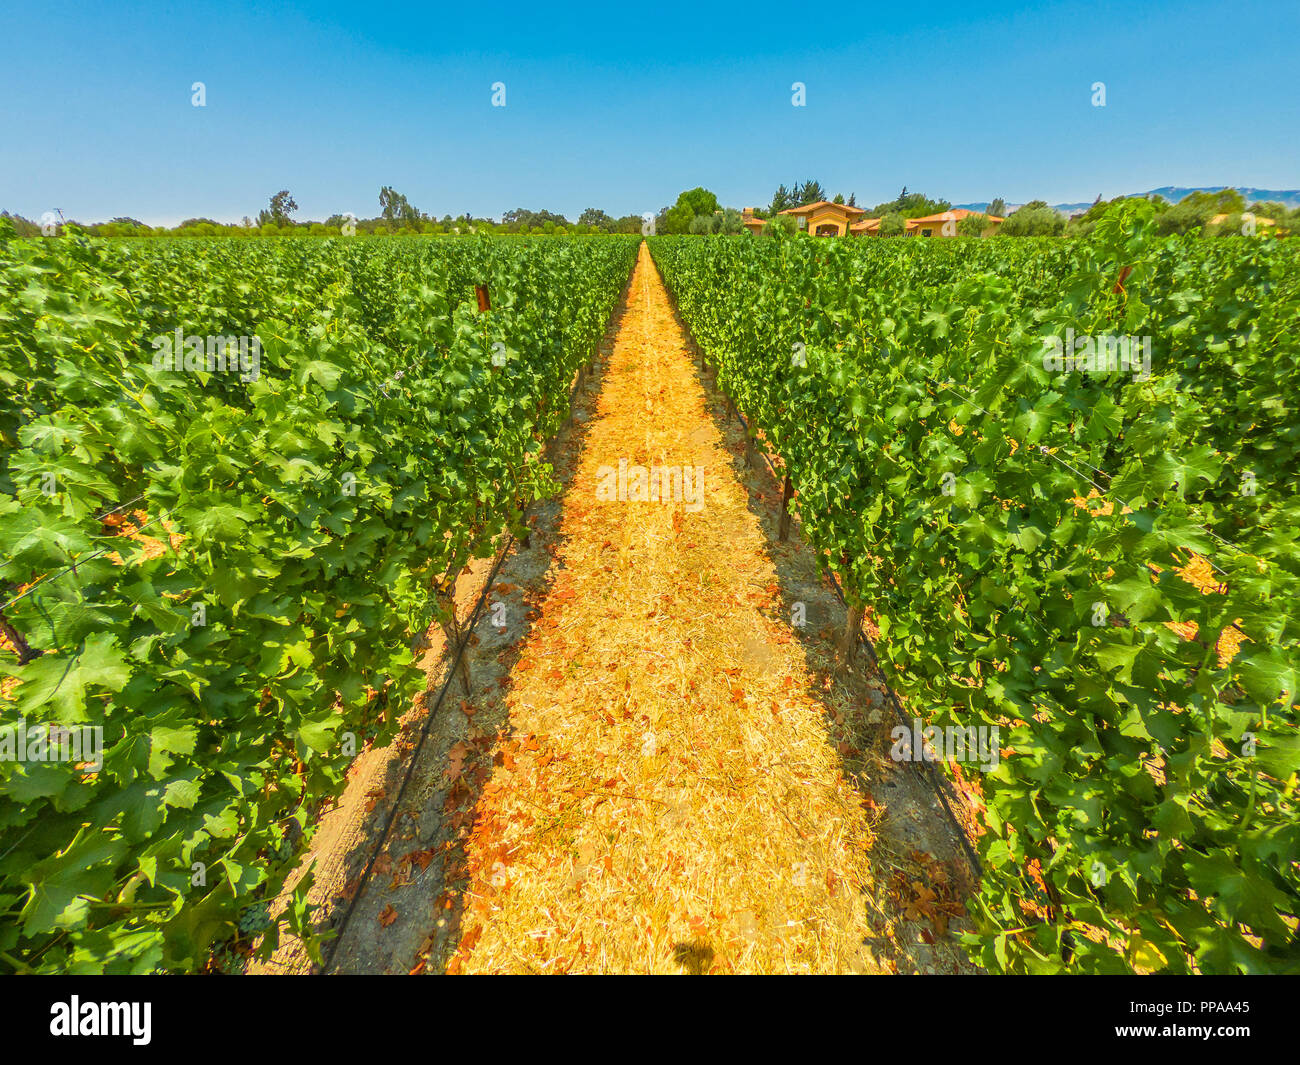 Scenic landscape of vineyard winery grape picking.Rows of white grapes in one of many vineyards. Los Olivos, Santa Ynez Valley, north of Santa Barbara, California, USA, popular for wine tasting tours. Stock Photo